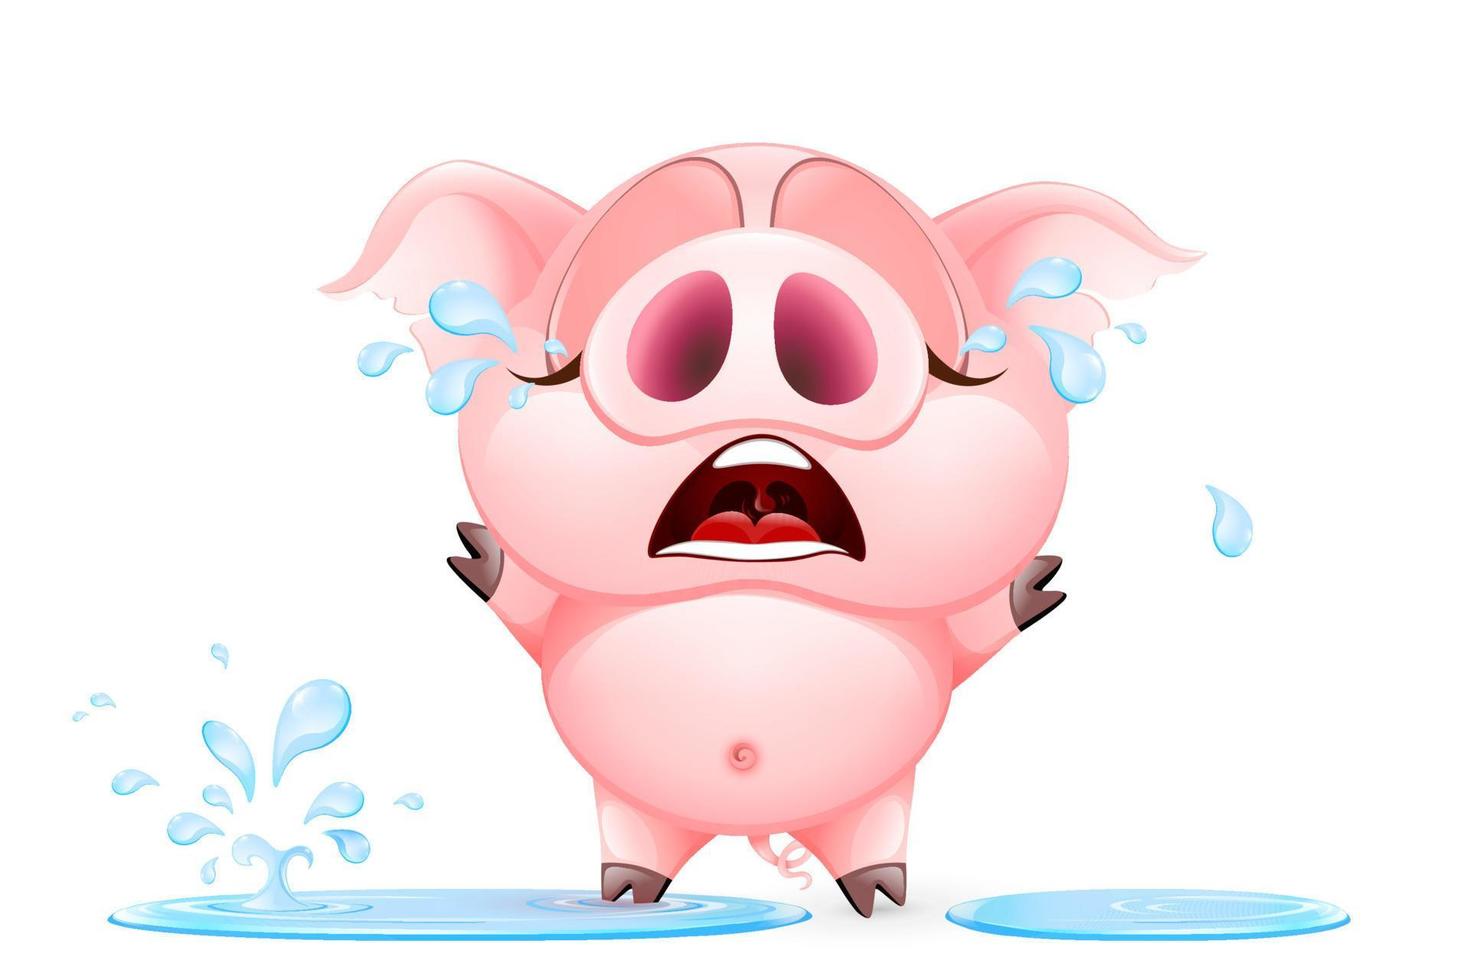 Pig cry character vector